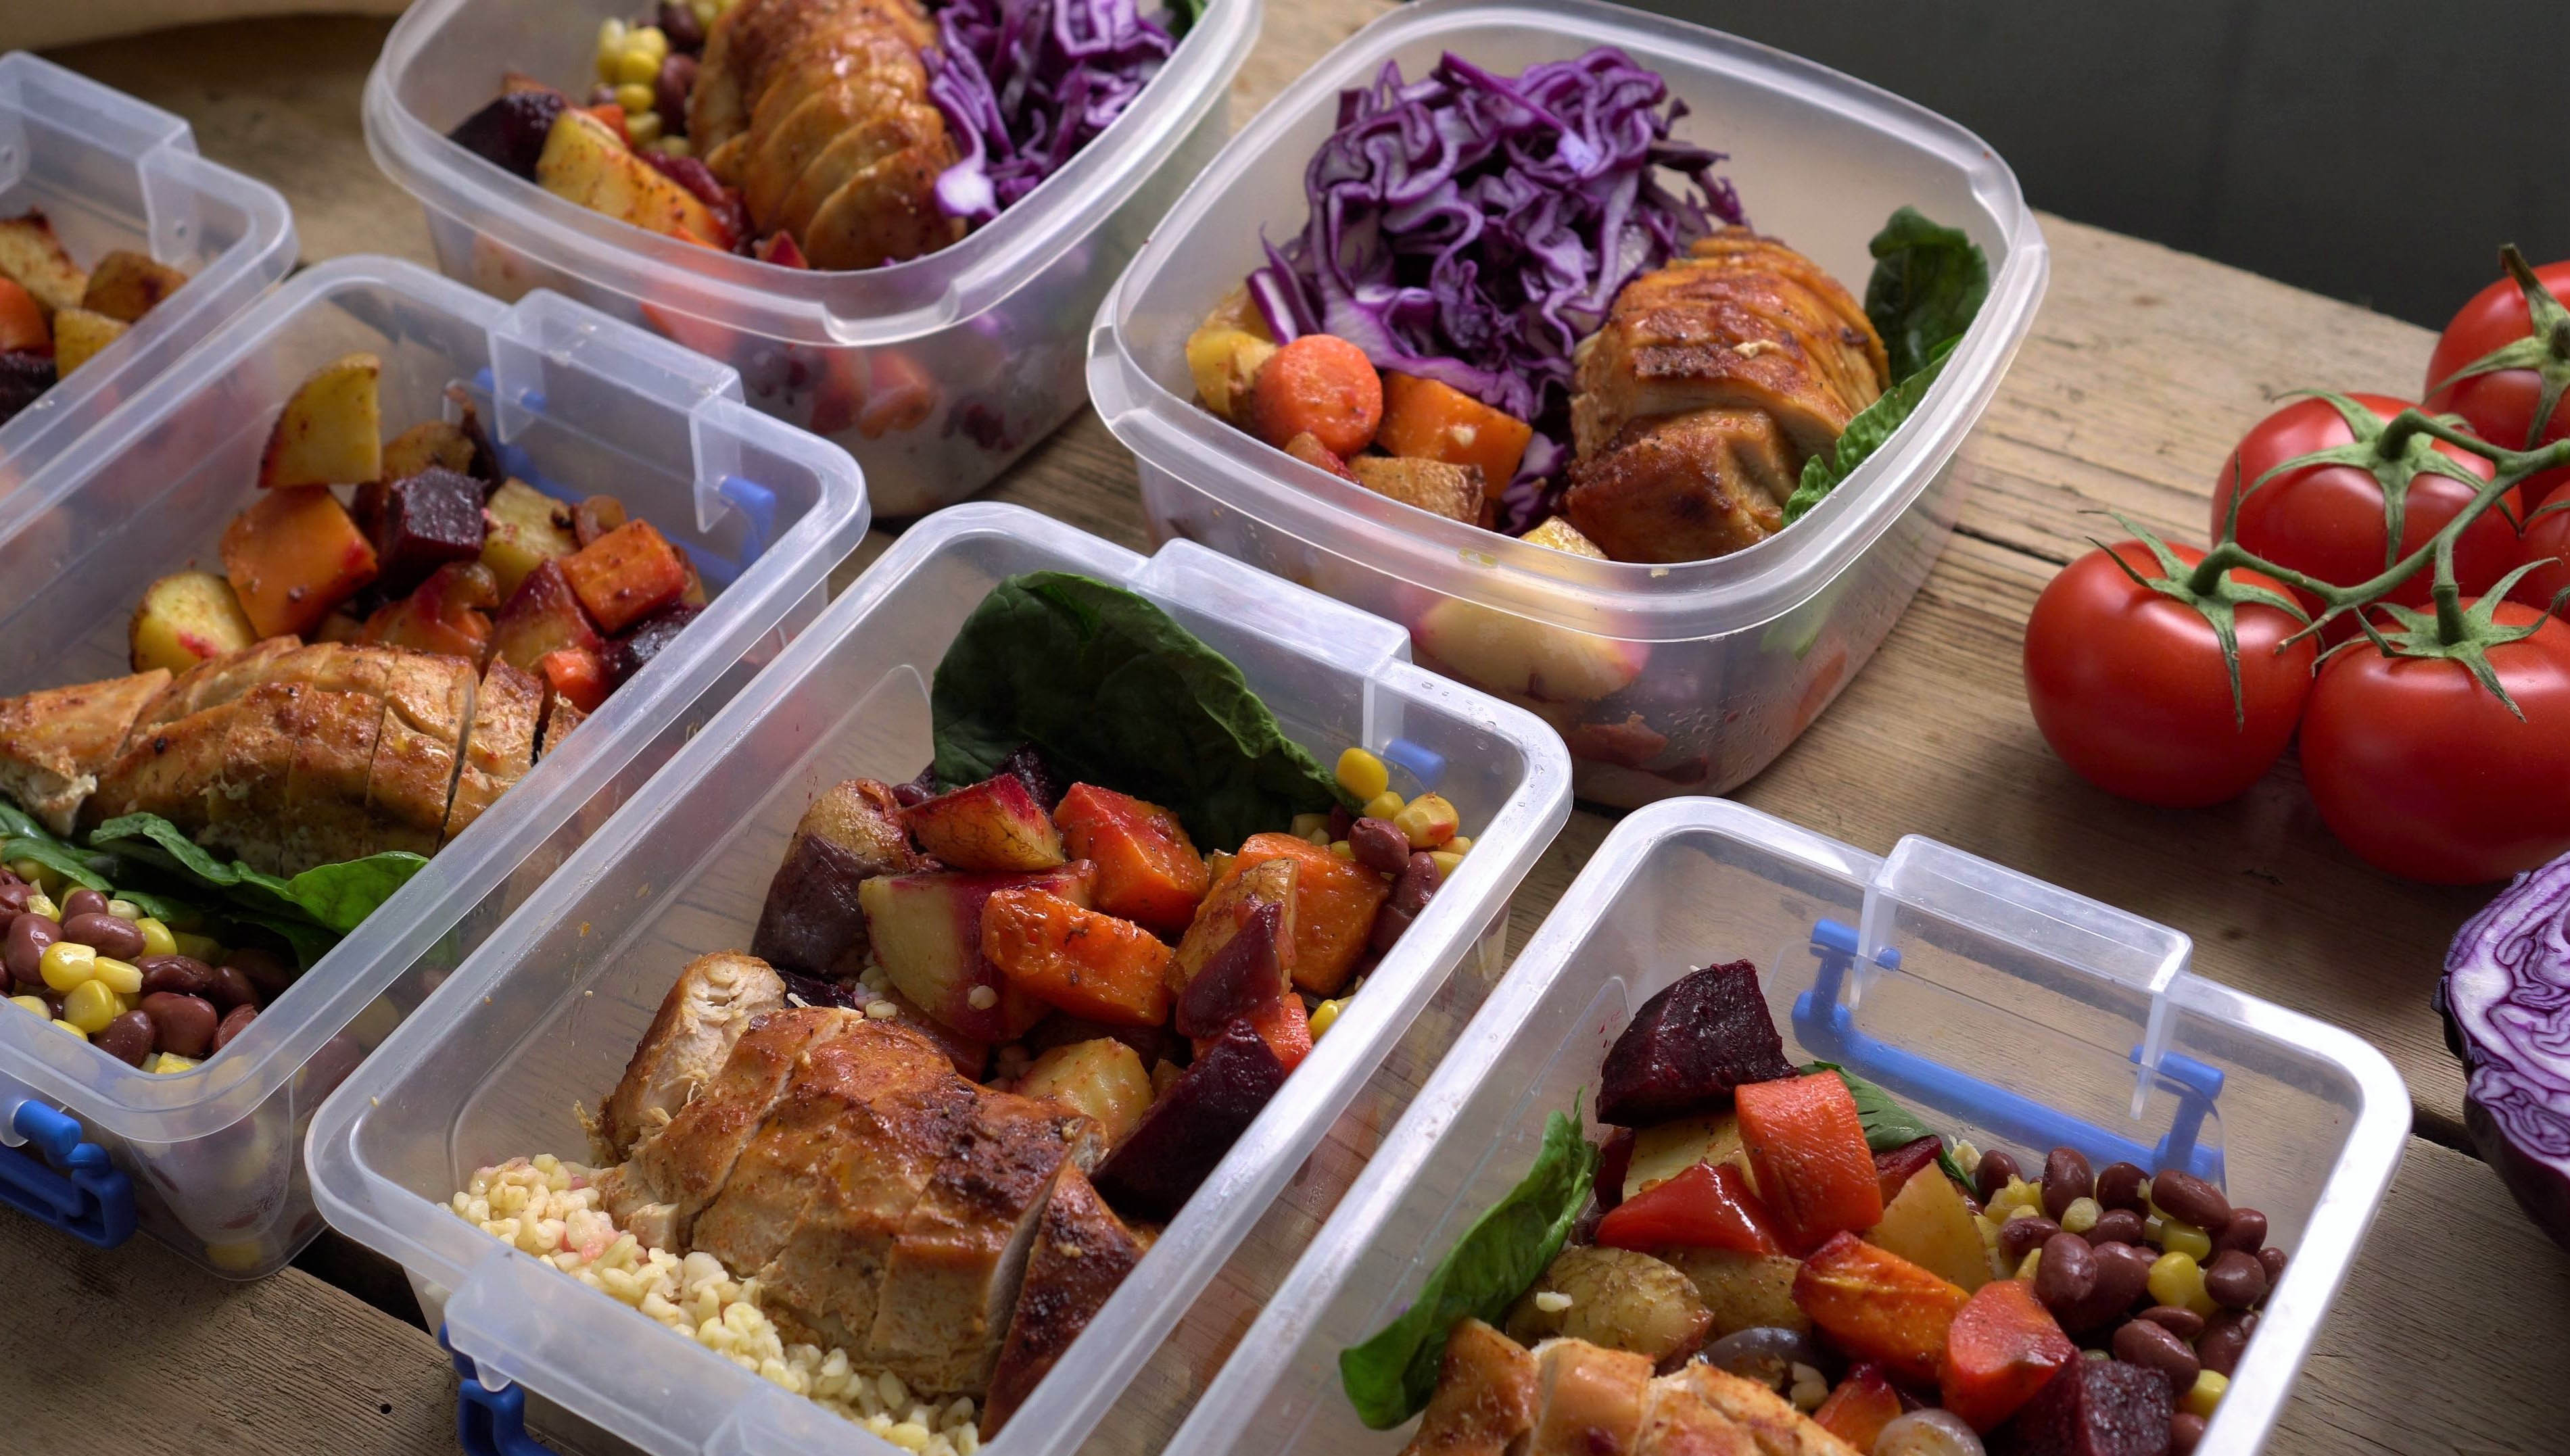 Multiple contains of meal prep that includes chicken, corn, beans, potatoes, and vegetables